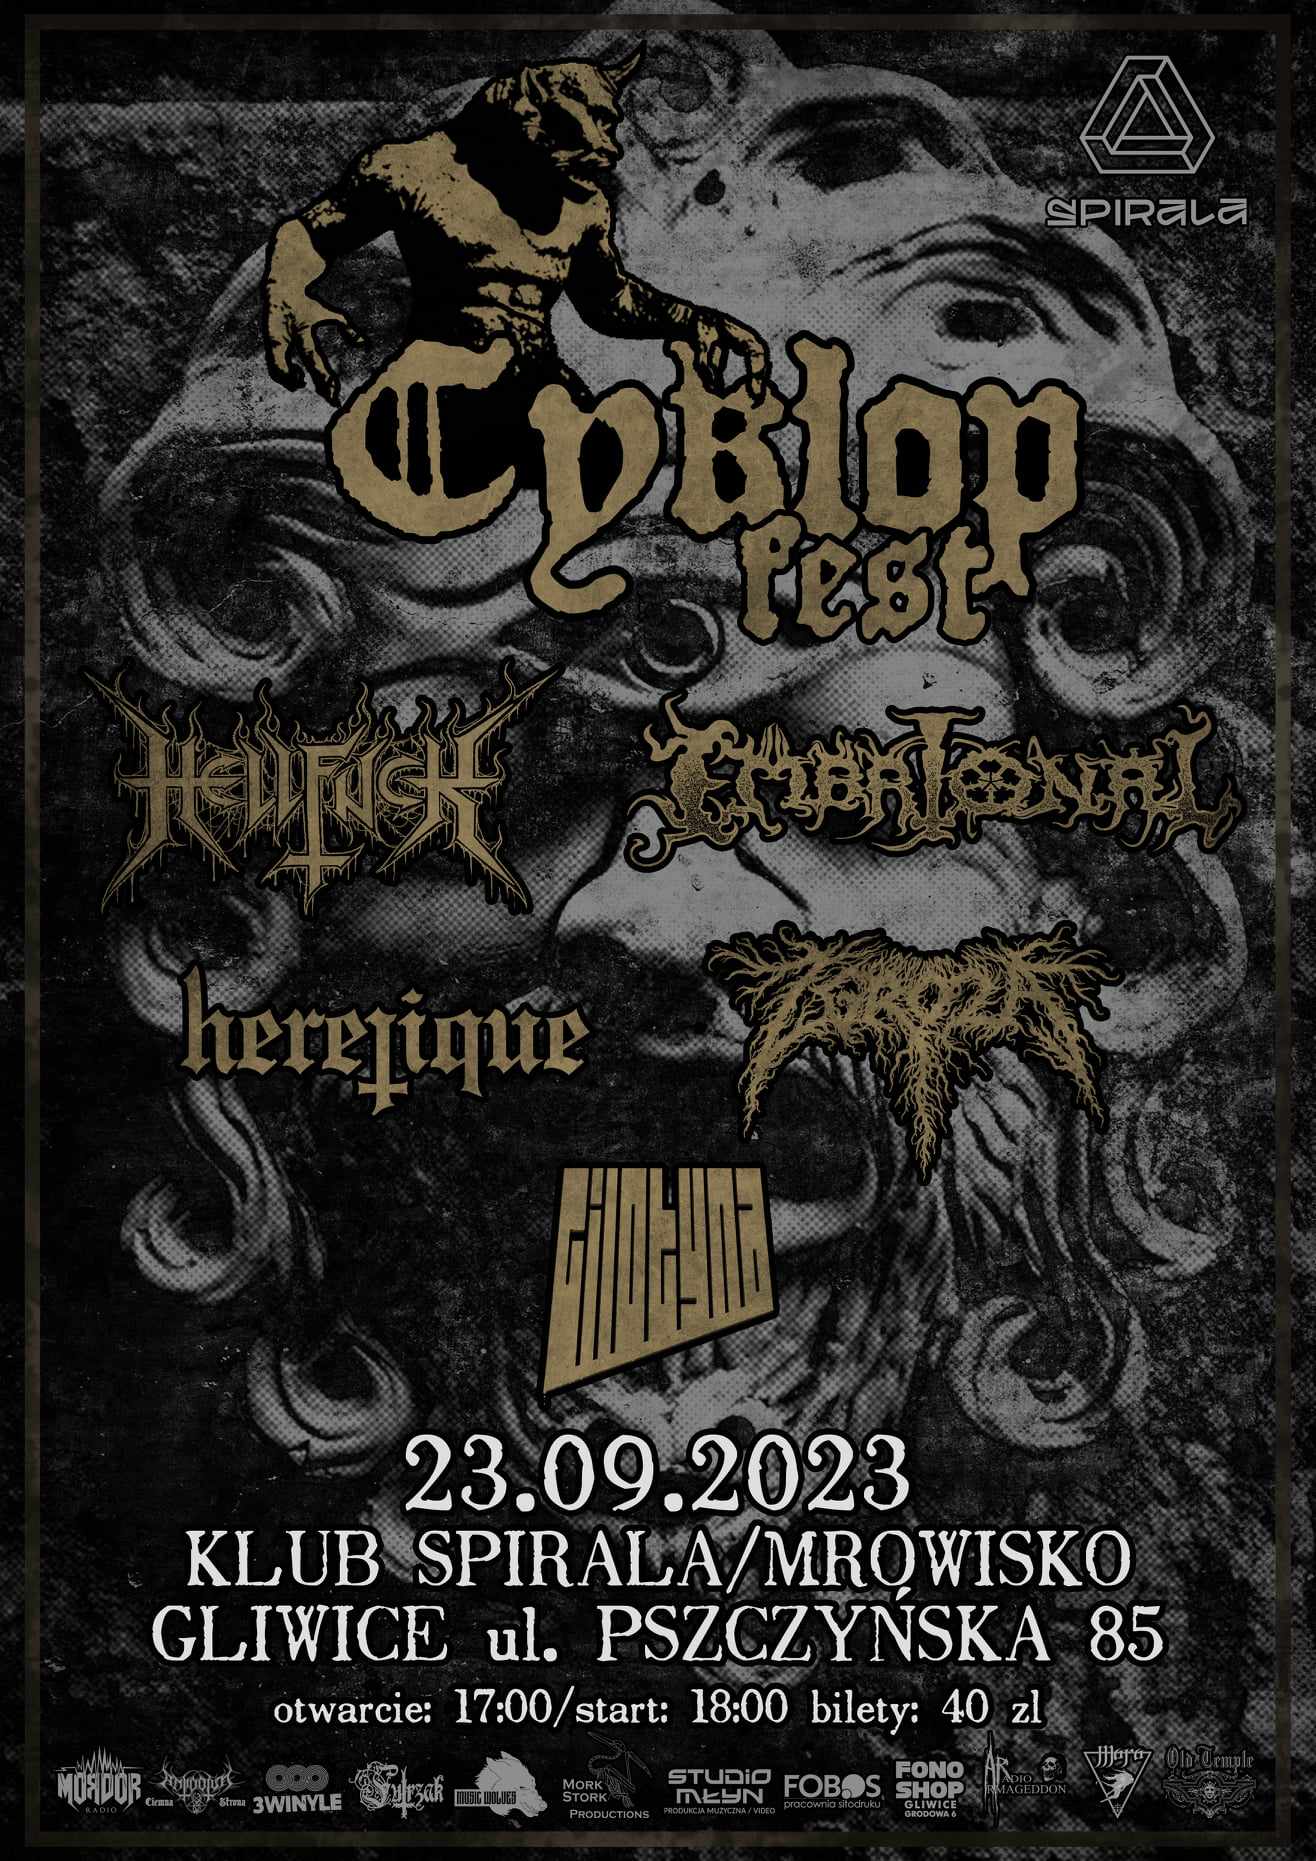 CYKLOP FEST – HELLFUCK / EMBRIONAL / HERETIQUE / ZGROZA / GILOTYNA